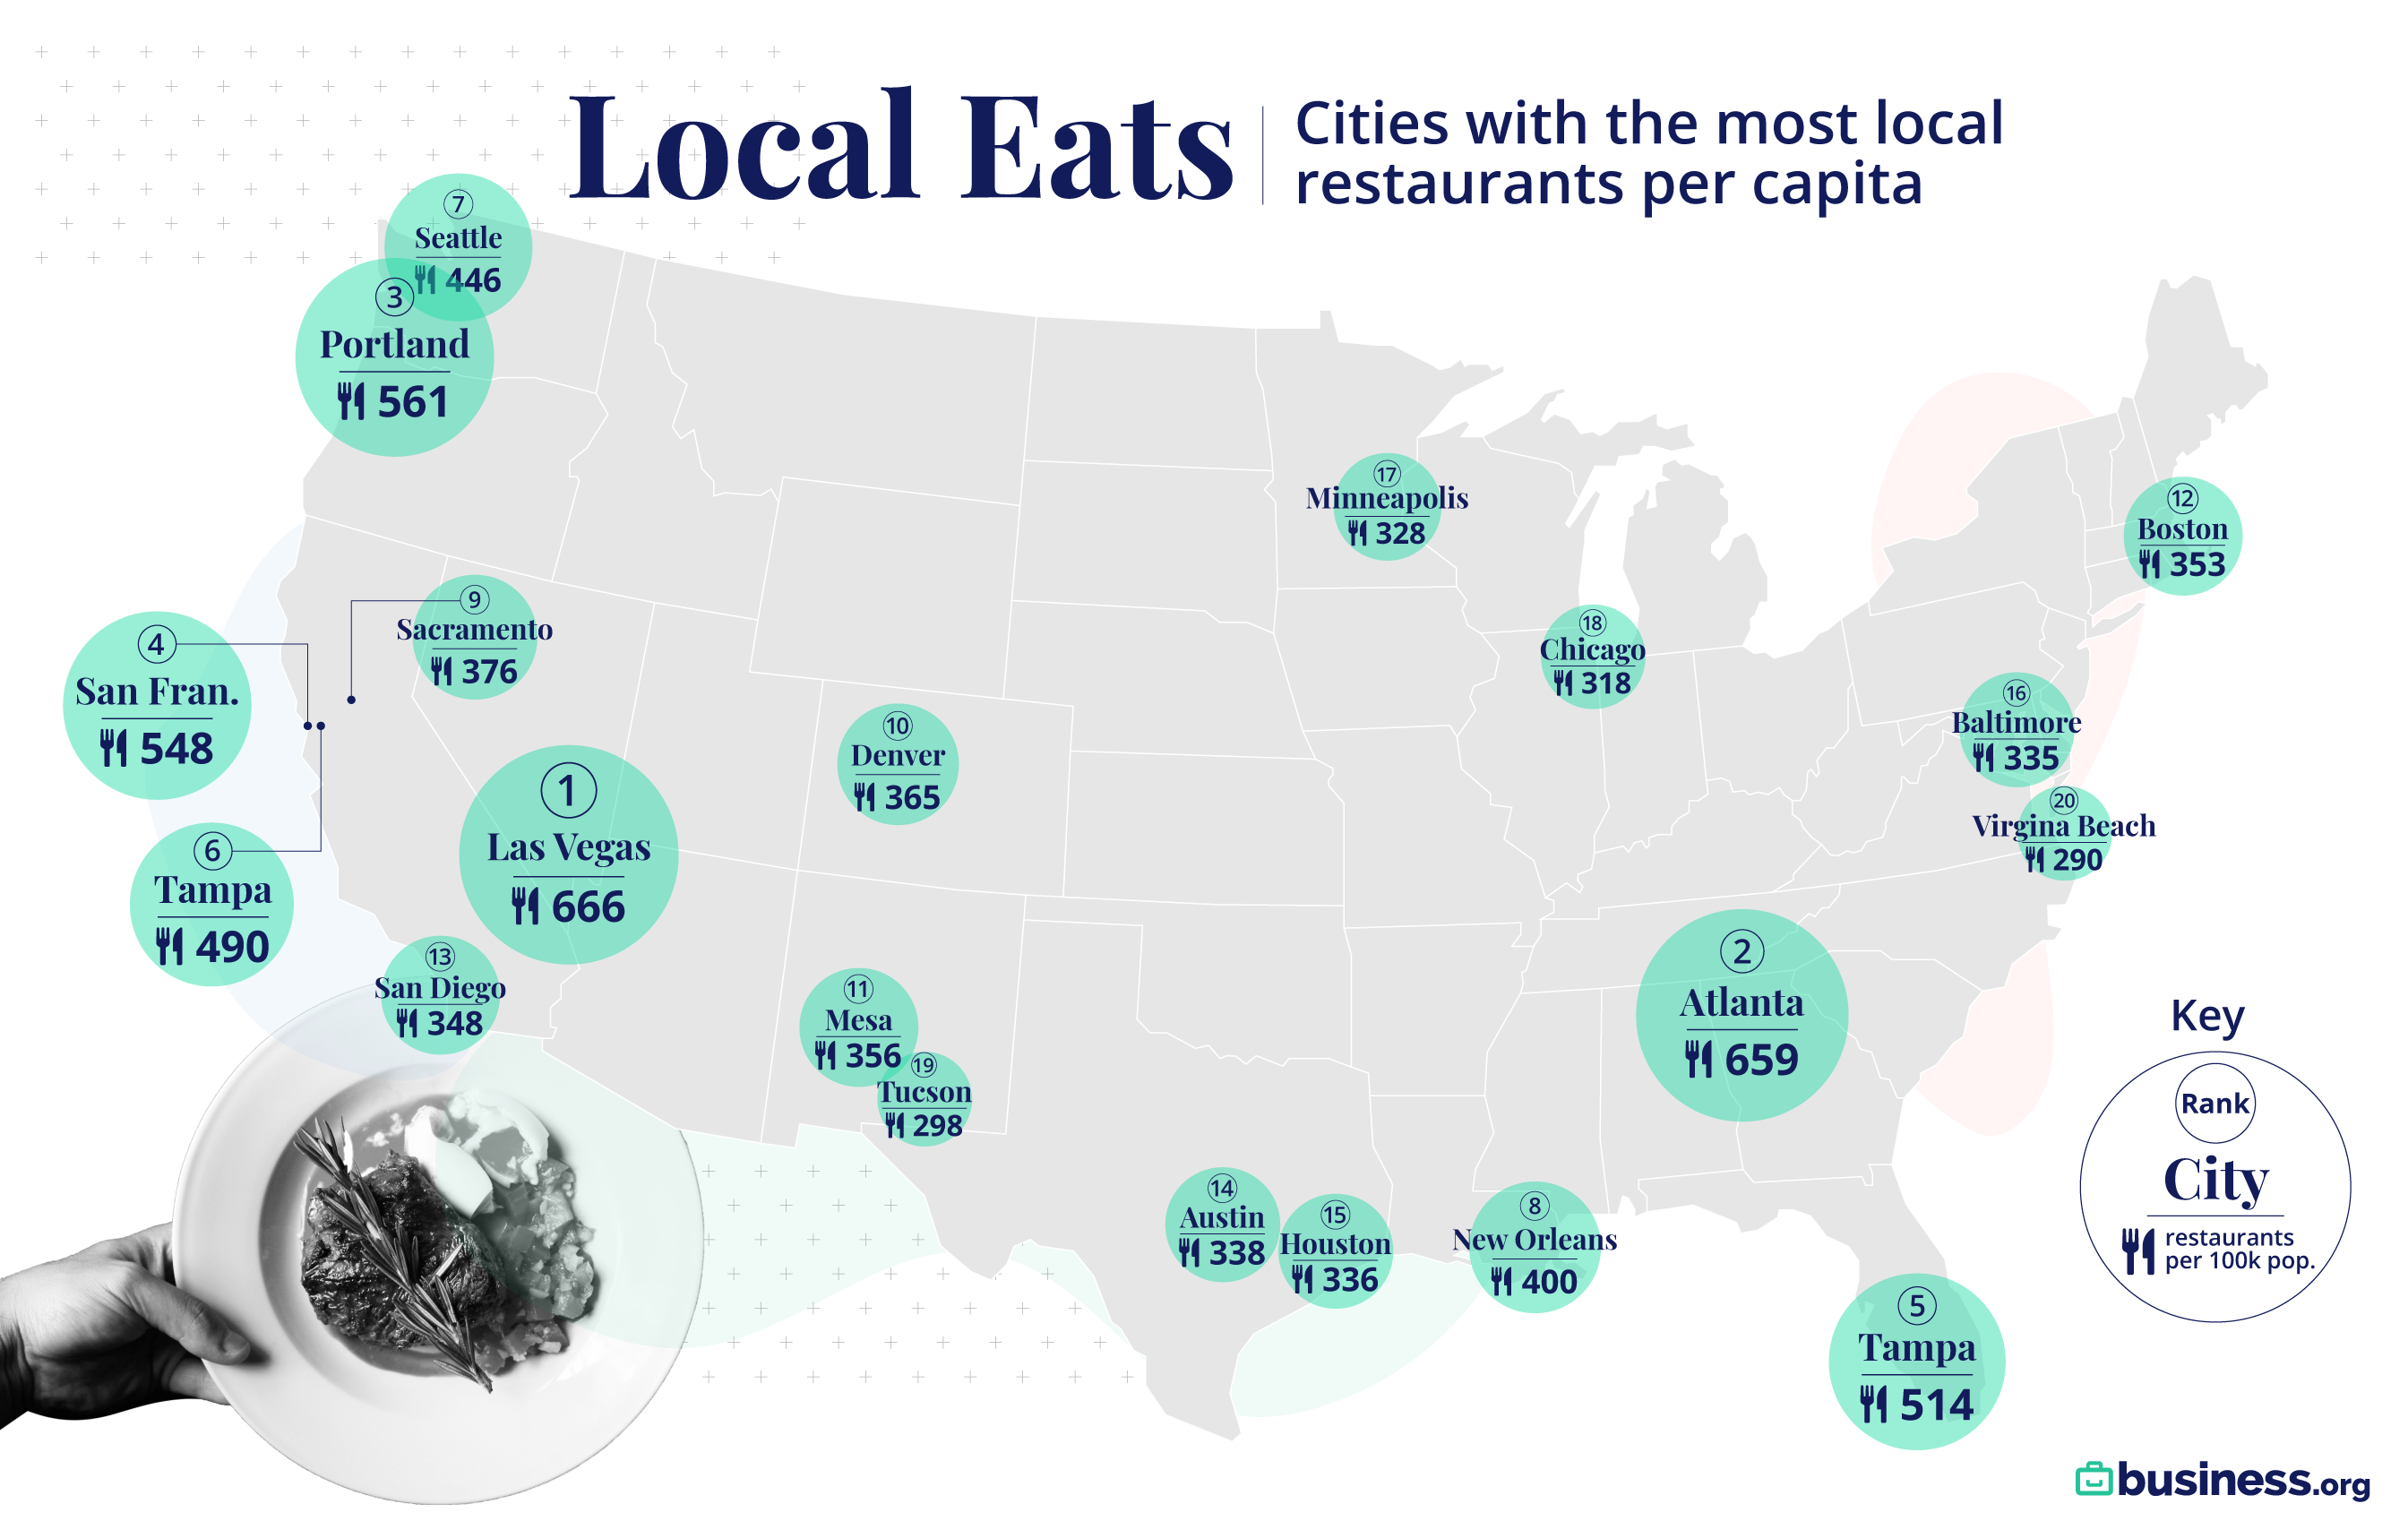 Map of U S showing cities with most local restaurants per capita